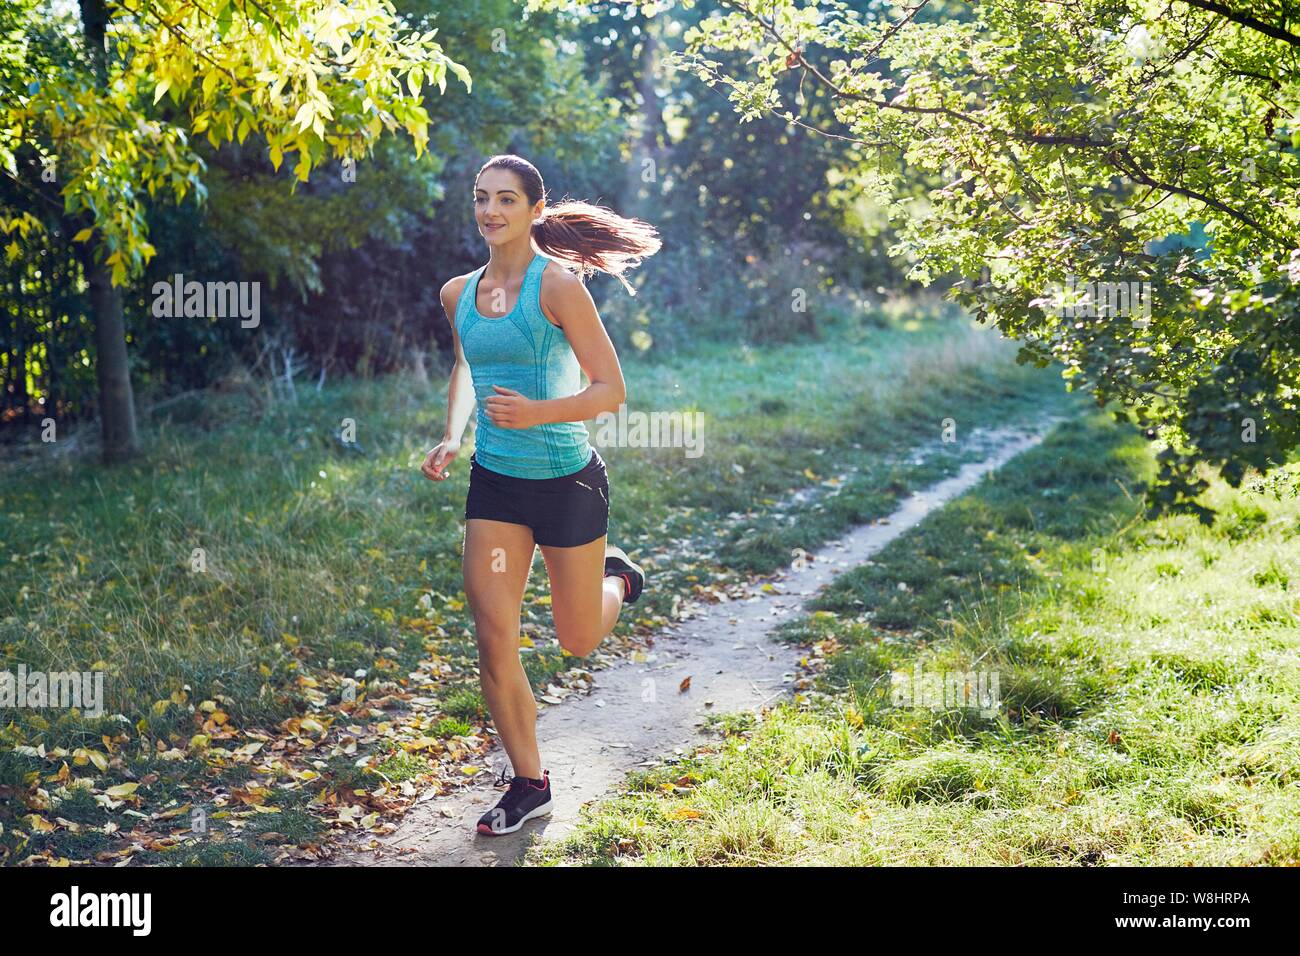 Young woman jogging on path. Stock Photo